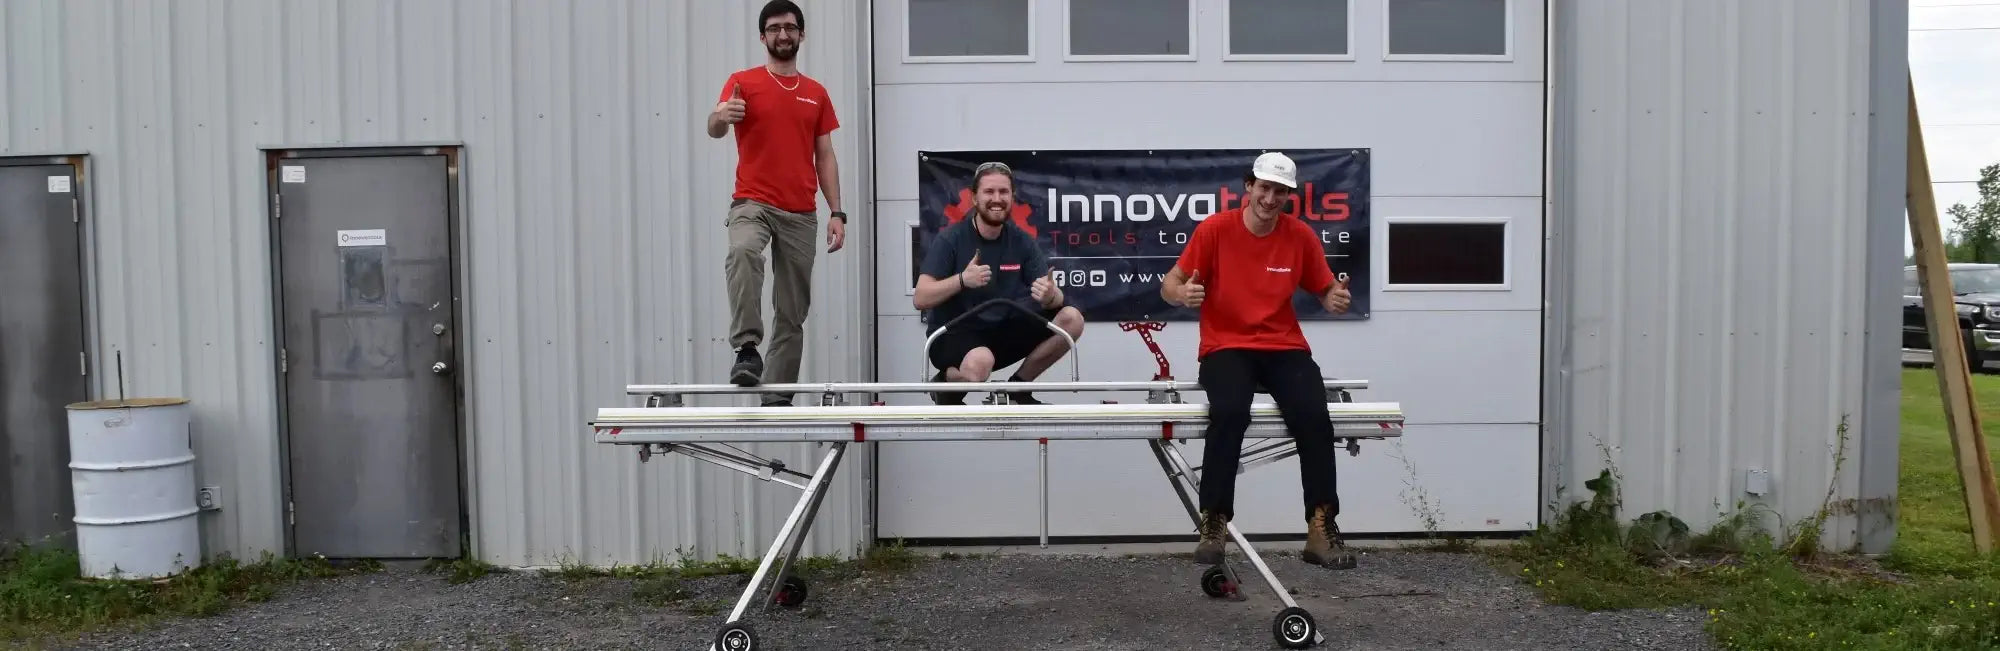 Three Innovatools employees on top of a siding brake mounted on a collapsible stand to prove sturdiness